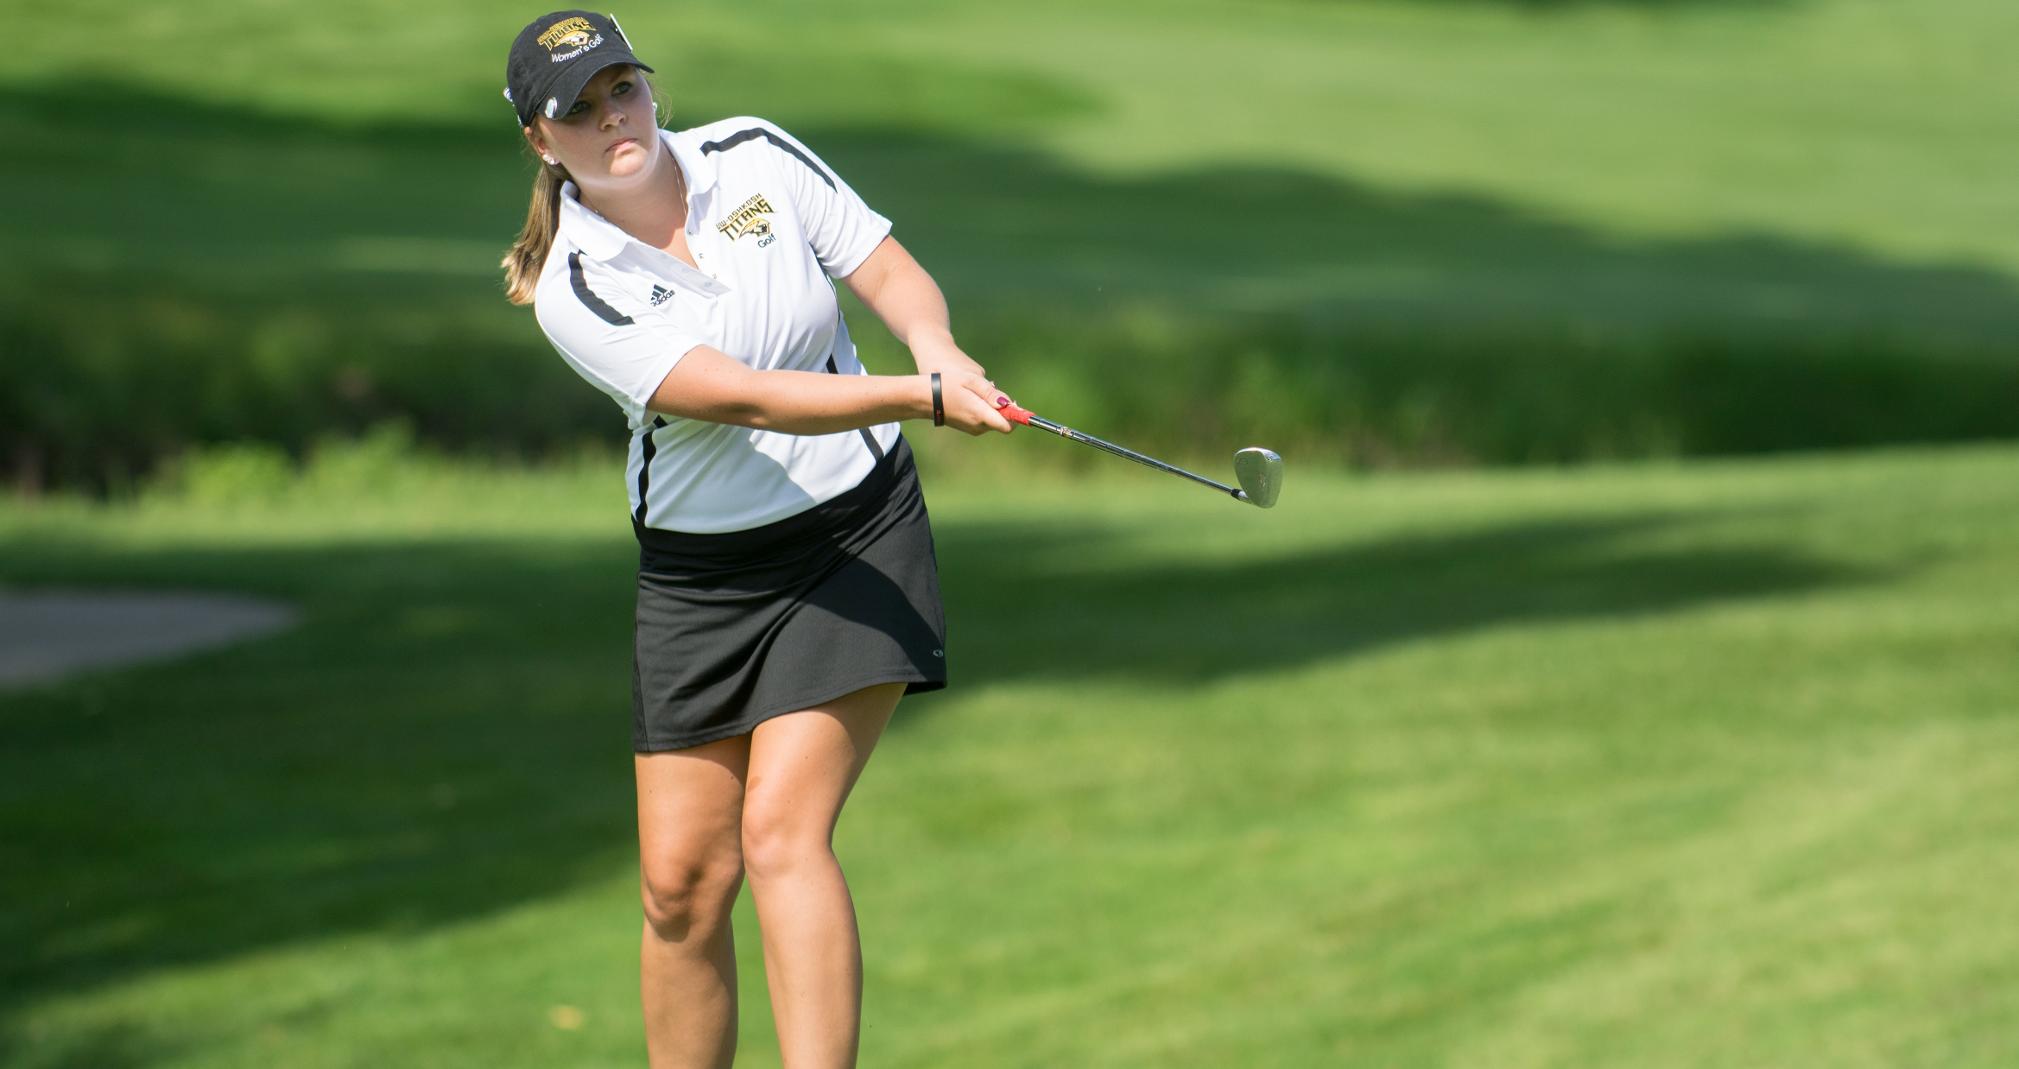 Laura Stair finished second for the Titans and eighth overall with 161 strokes.